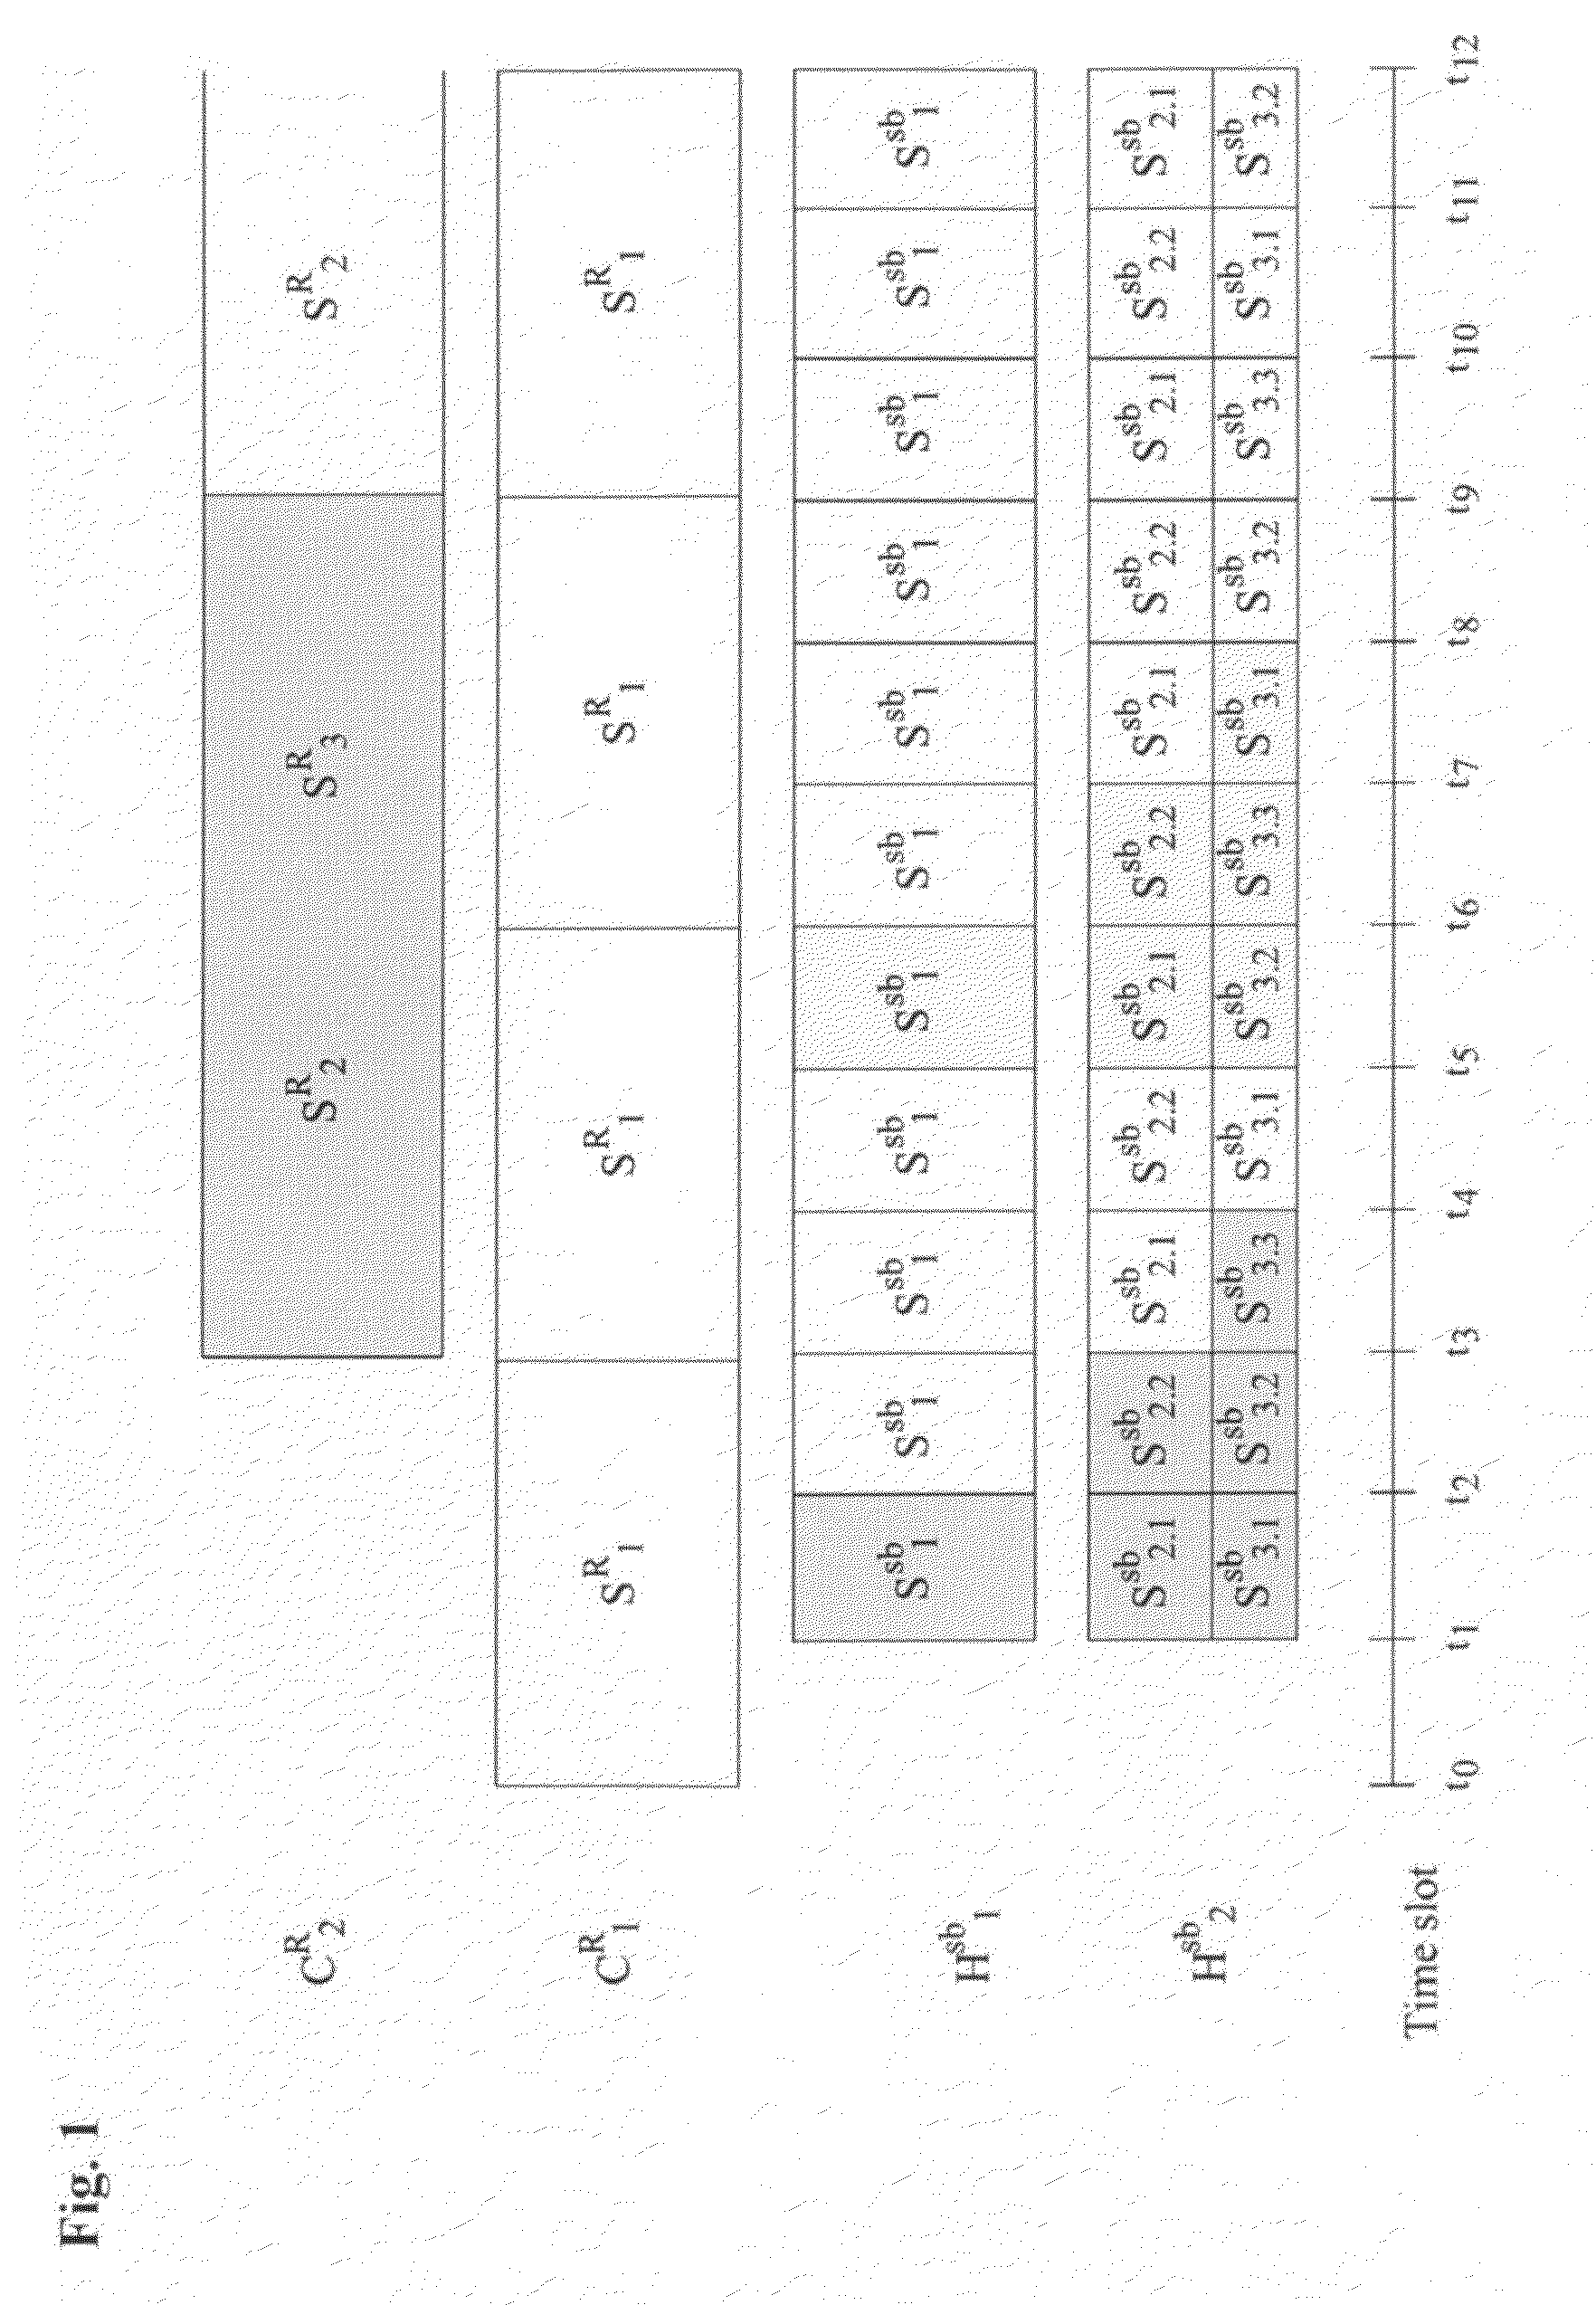 Method for transmitting near video on demand (NVoD) using catch and rest (CAR) and sub-channels